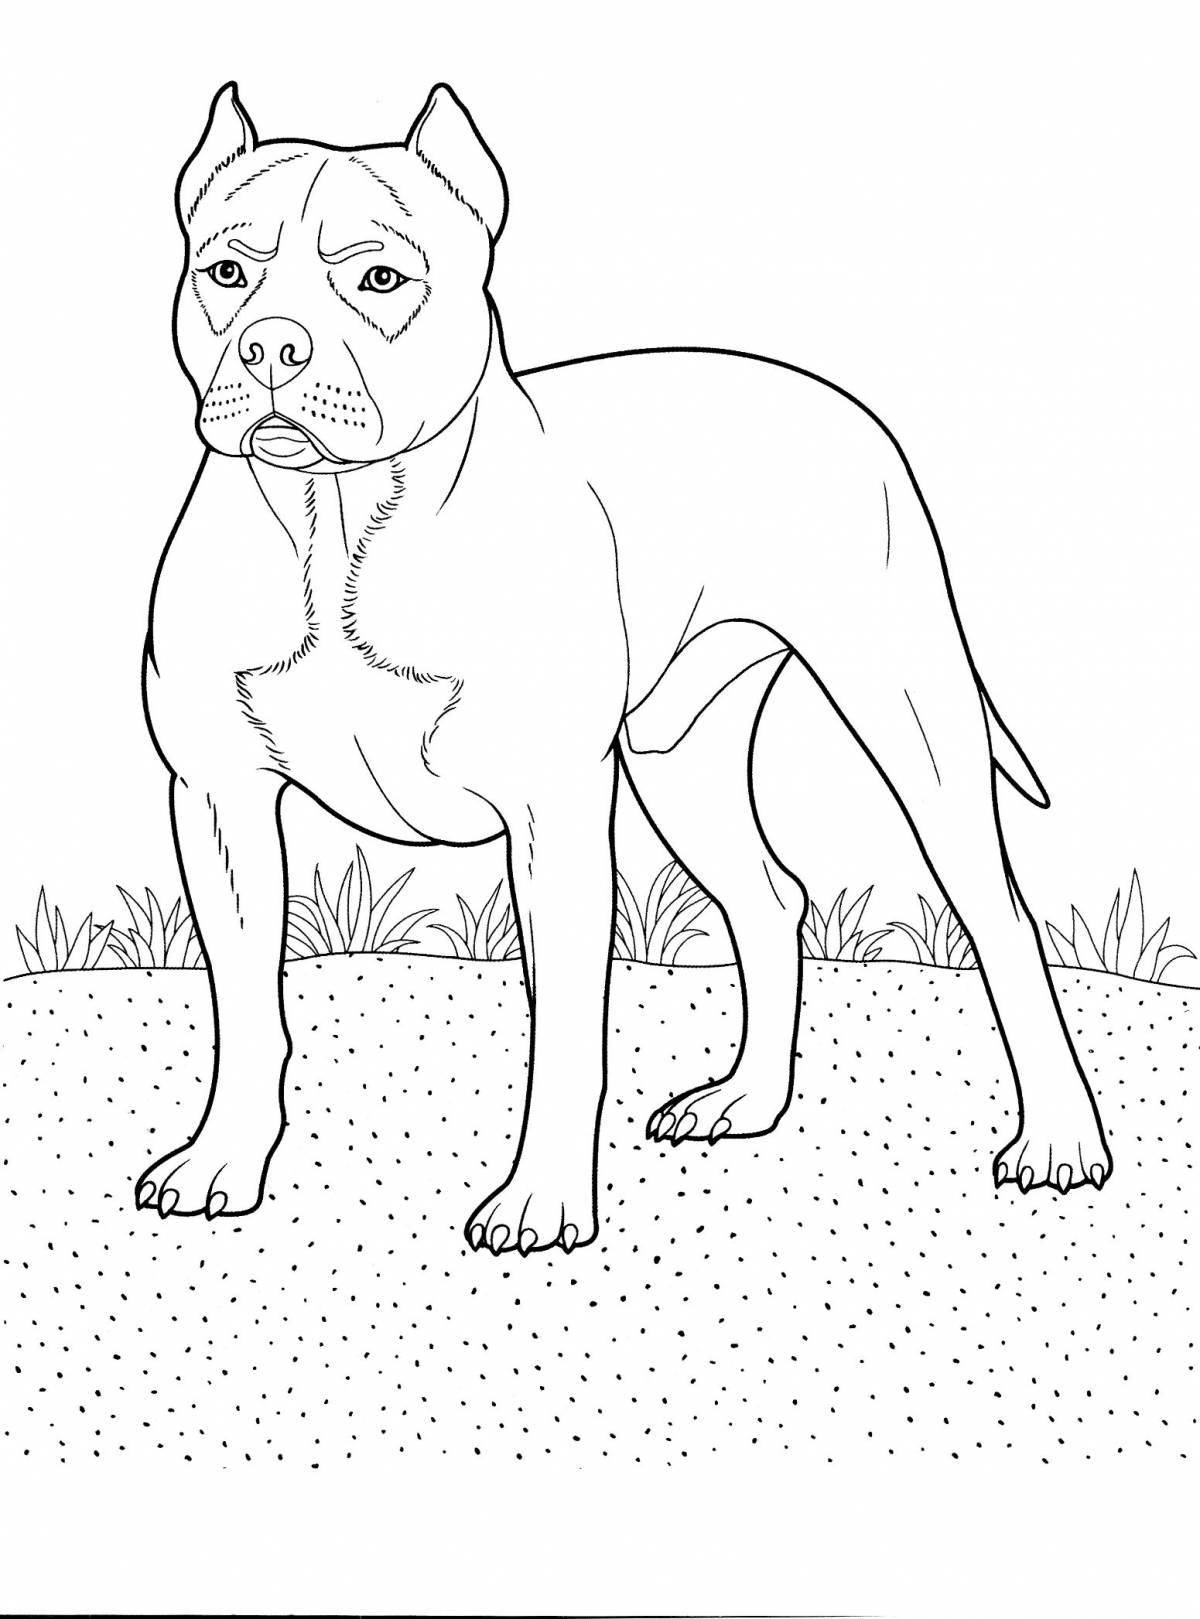 Coloring dogs of different breeds